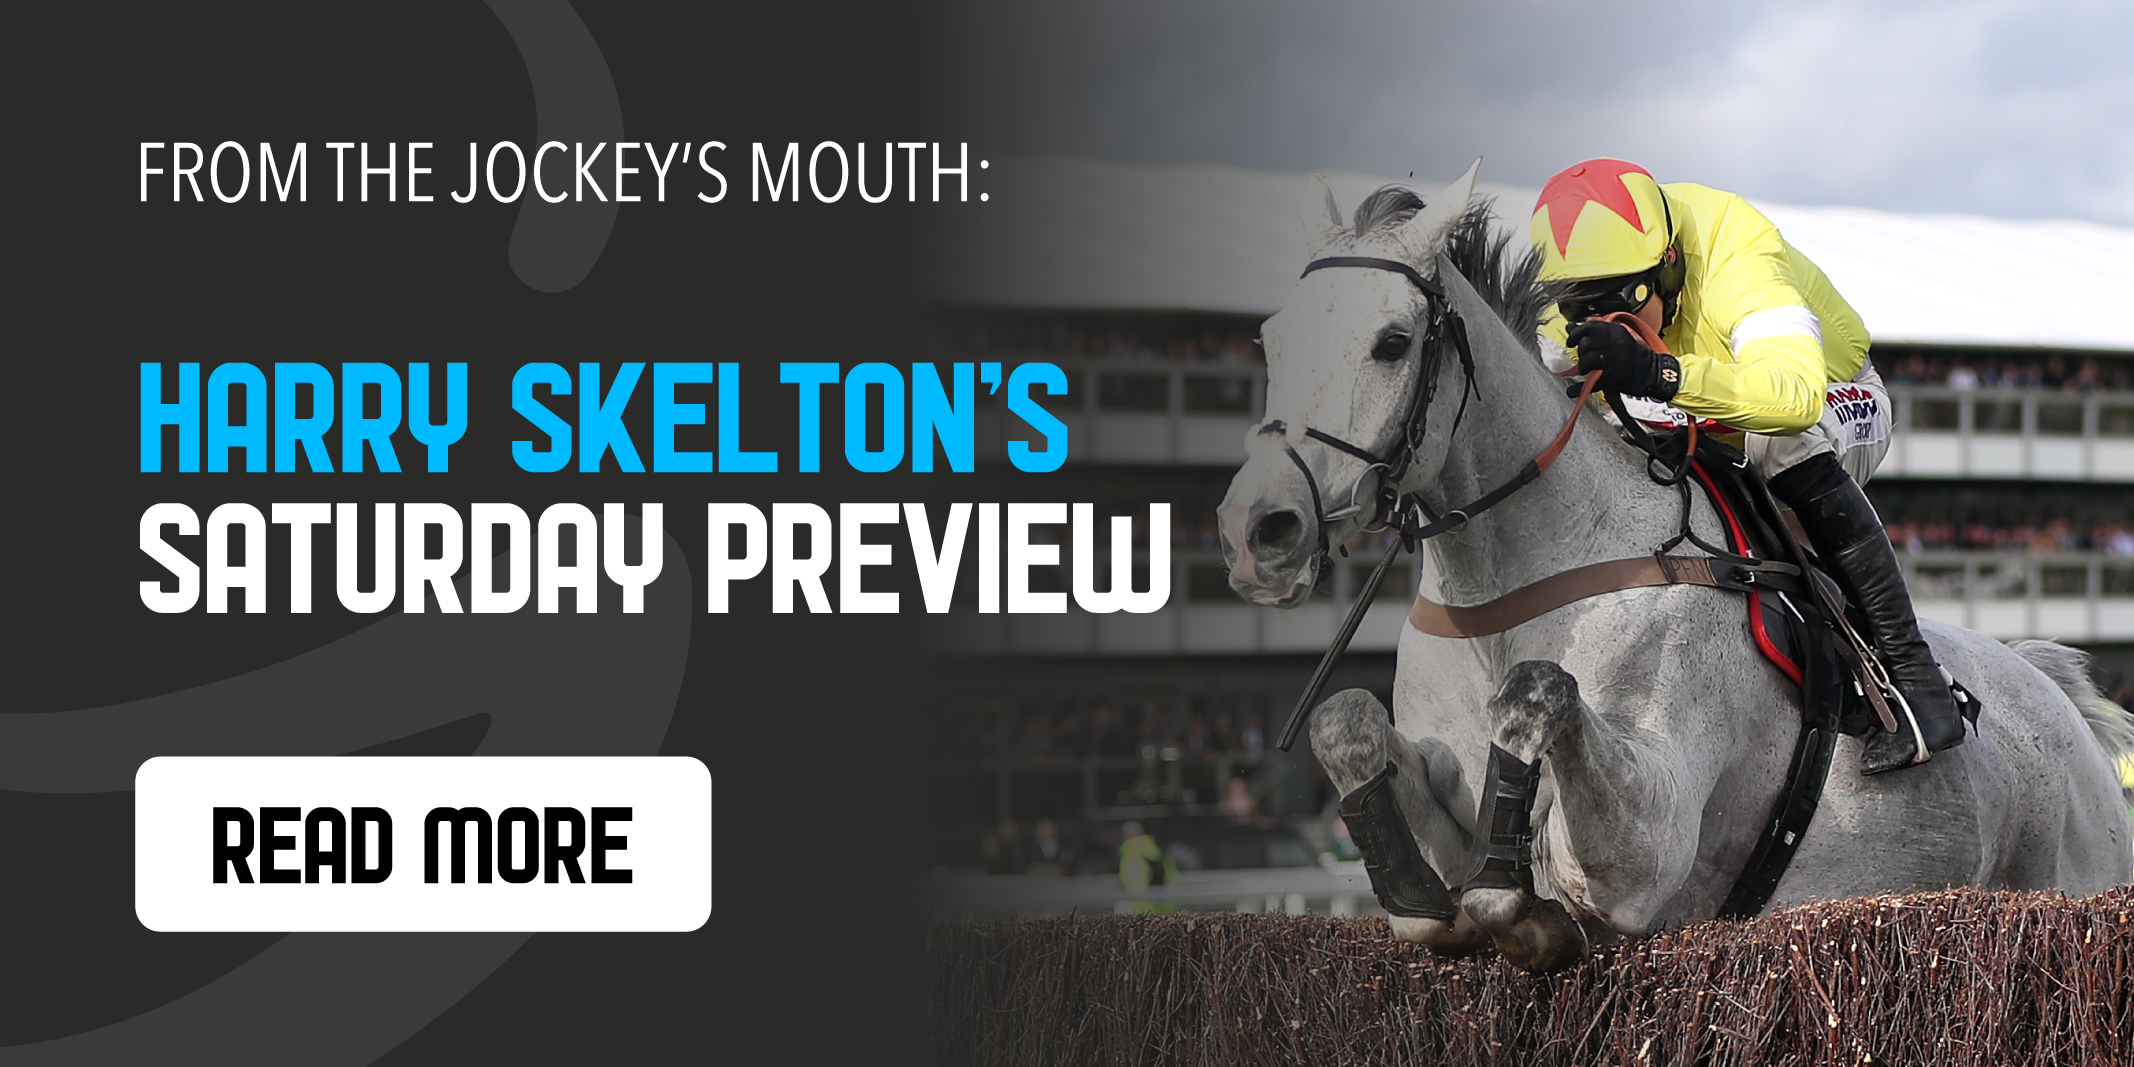 Harry Skelton: “We’ve had this race in mind for a long time – she’s got a good chance”